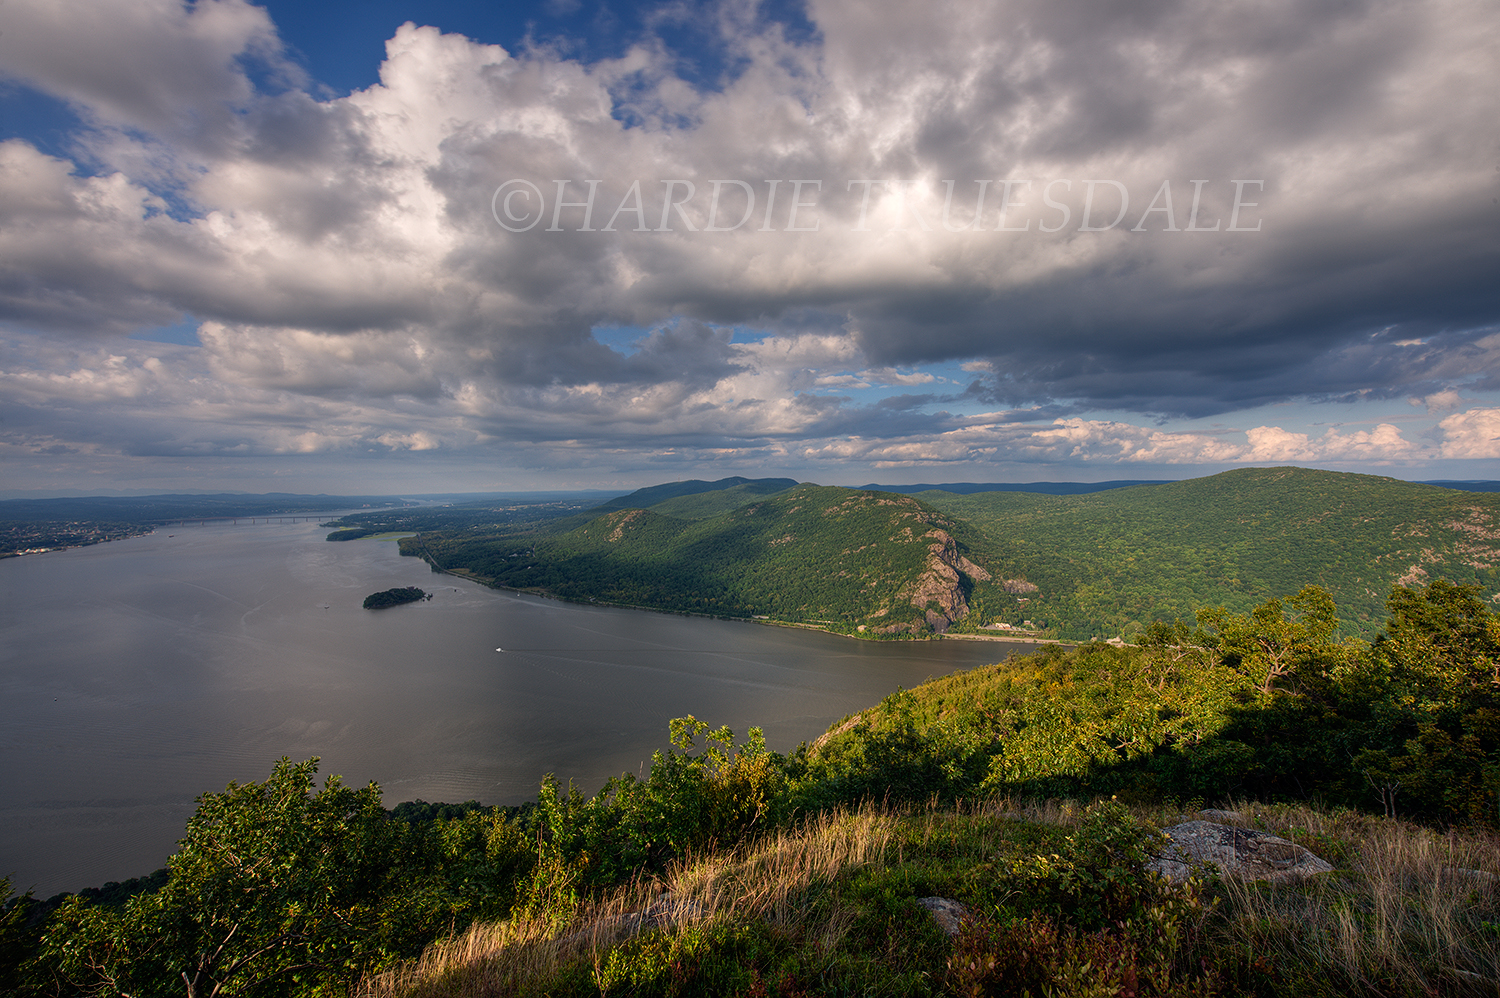  Hr#246 Hudson River Views From Storm King Mountain" 